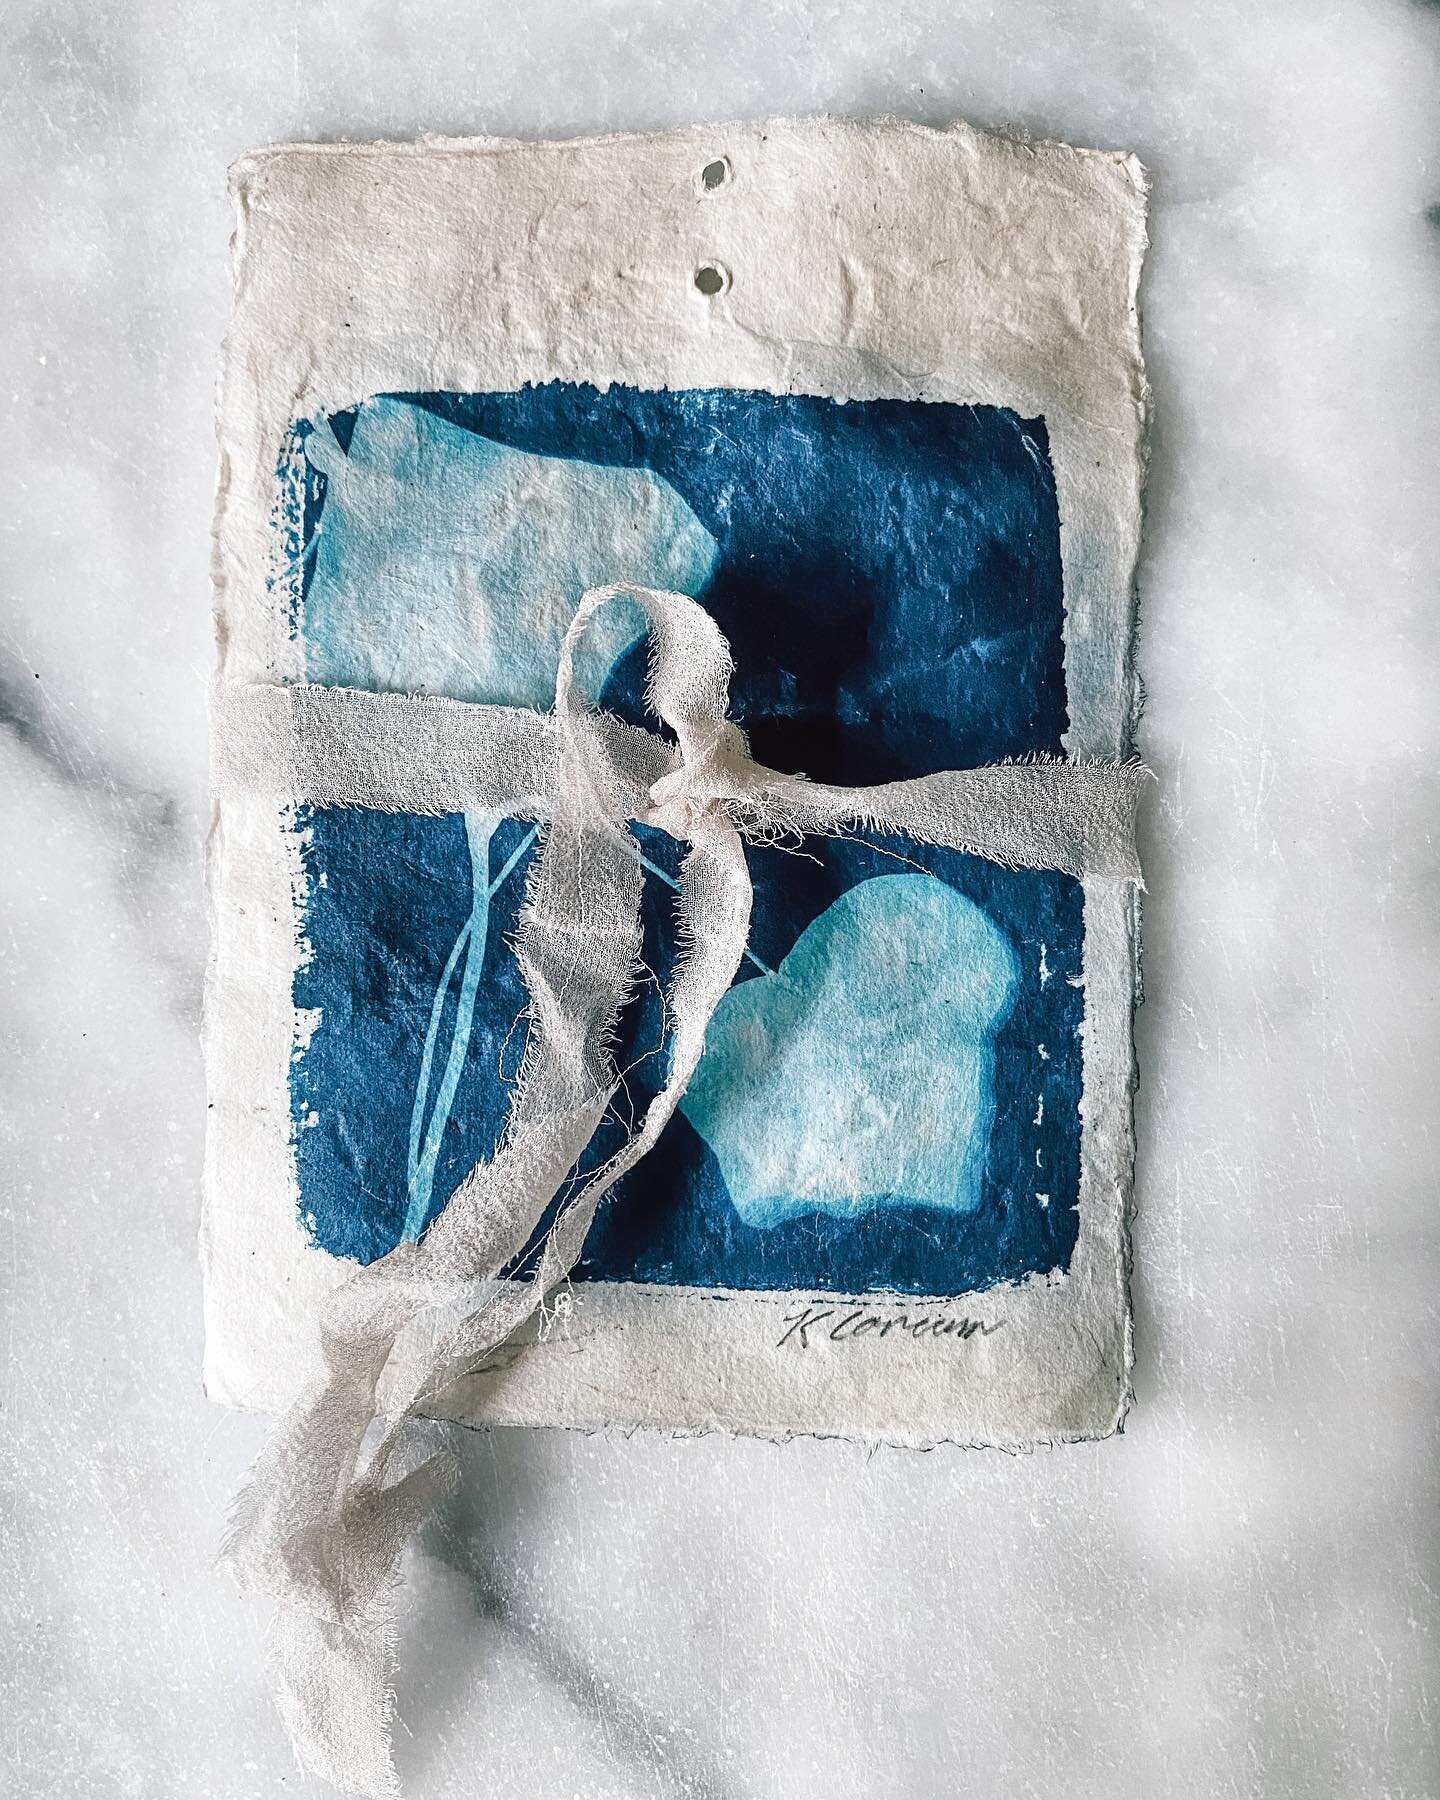 A cyanotype print all tied up in a bow, ⁣
⁣⁣
⁣a creation that still makes me smile⁣ 
⁣⁣
⁣This summer I created artwork for friends and family and they in return have given those works beautiful homes to exist in. I gave this beautiful cyanotype print